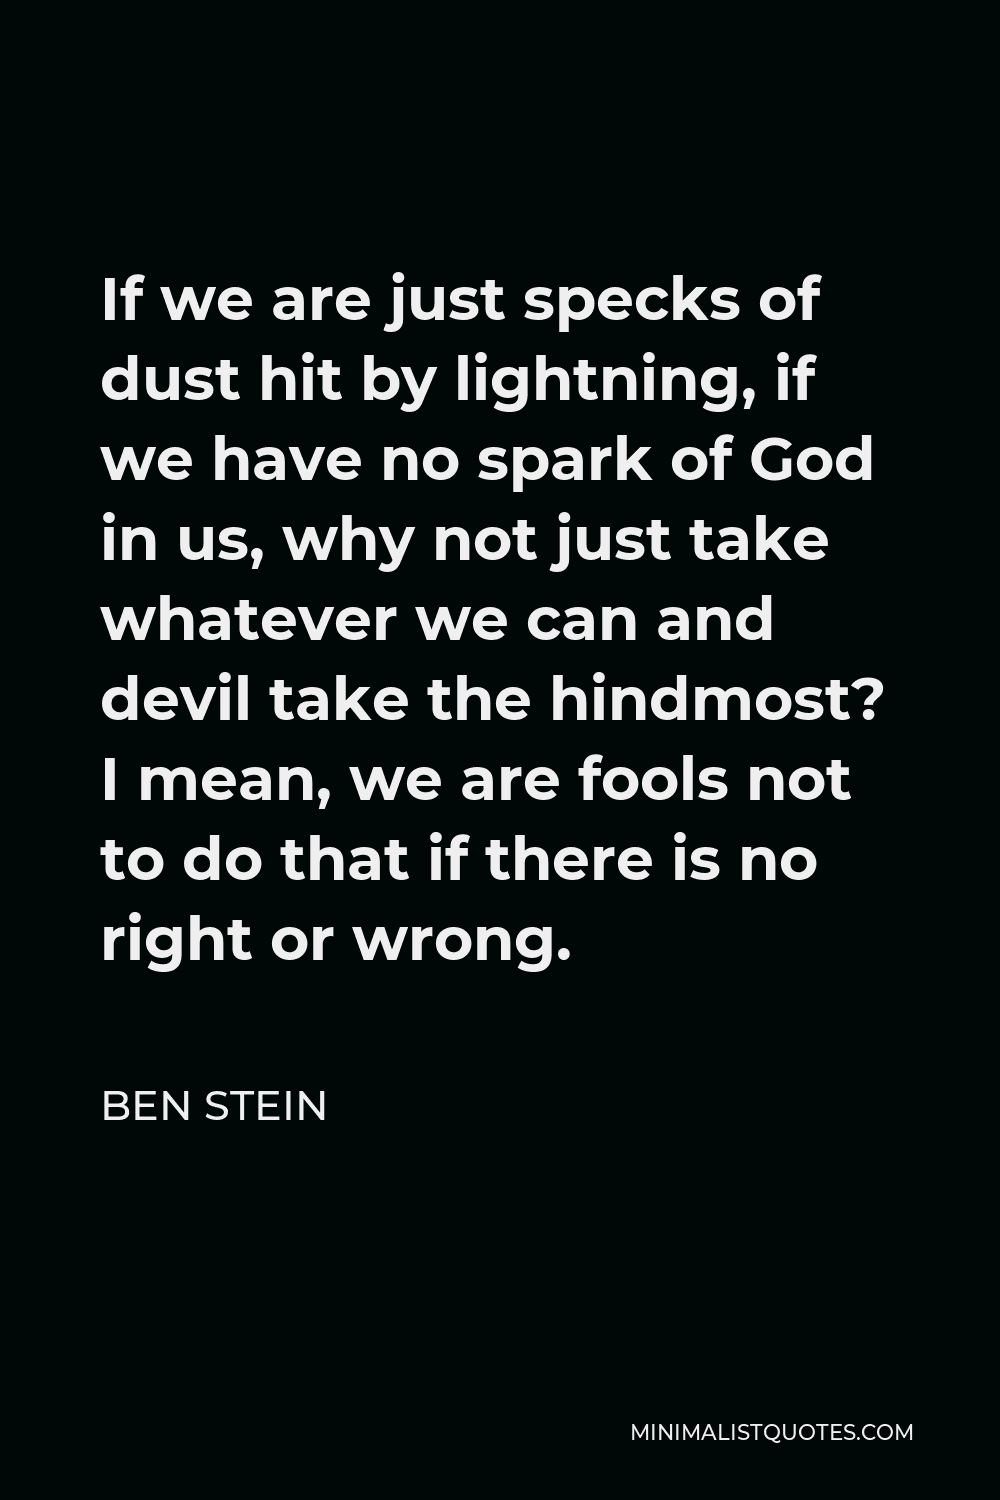 Ben Stein Quote - If we are just specks of dust hit by lightning, if we have no spark of God in us, why not just take whatever we can and devil take the hindmost? I mean, we are fools not to do that if there is no right or wrong.